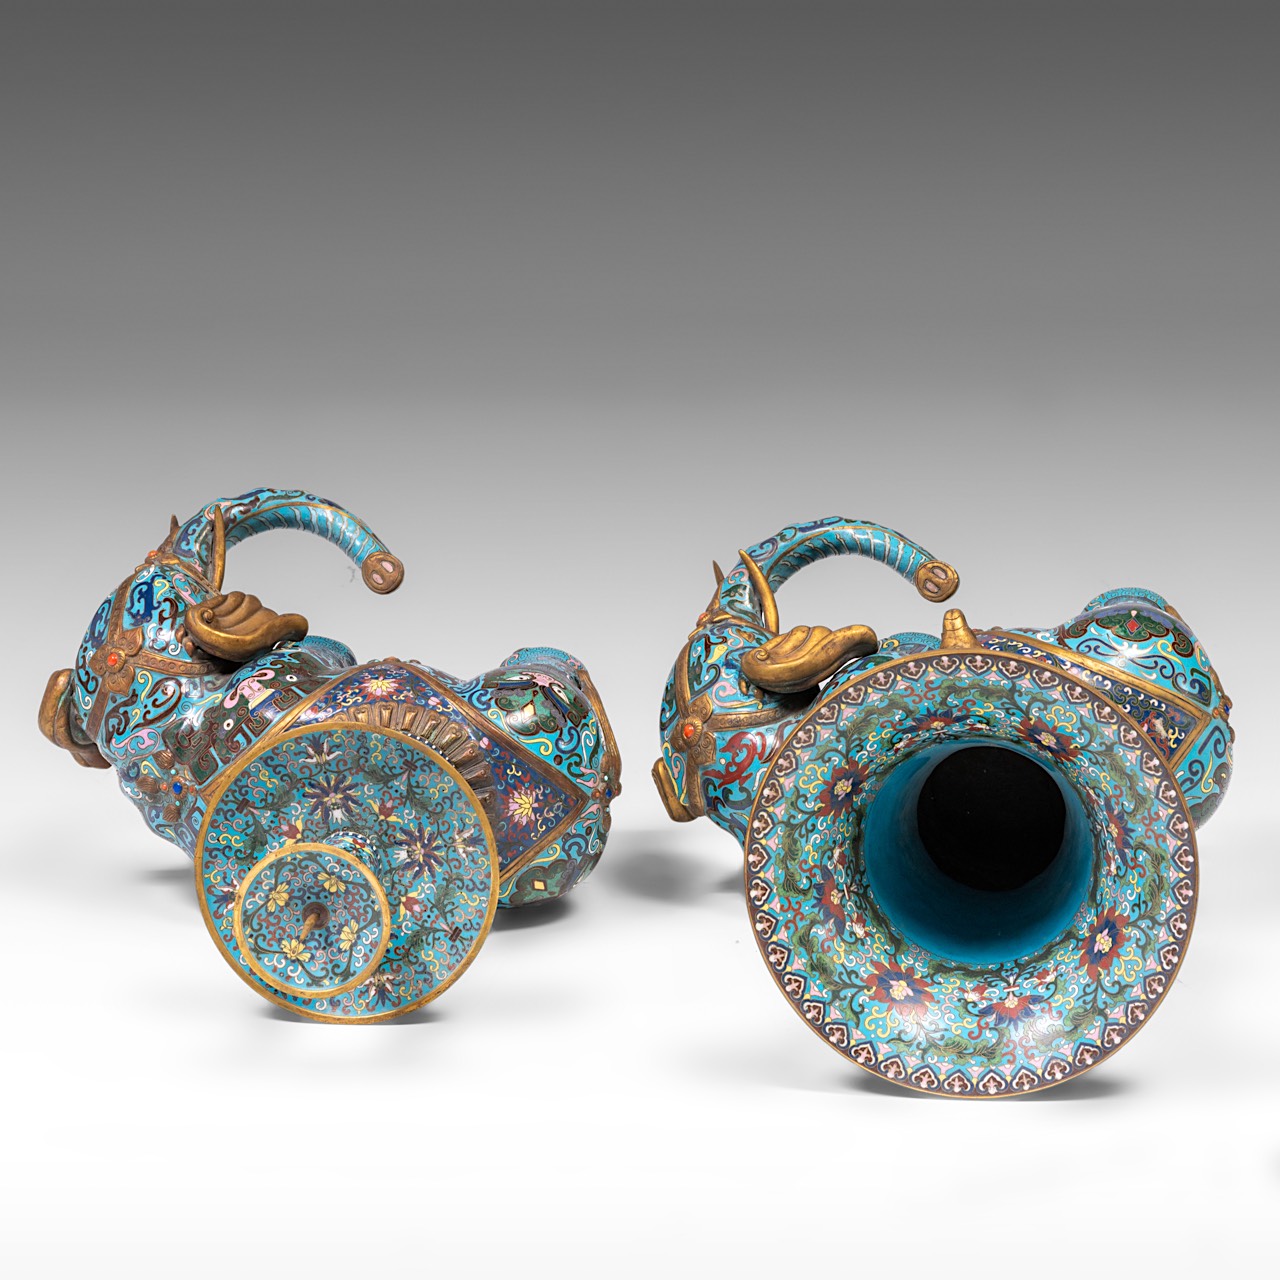 A Chinese five-piece semi-precious stone inlaid cloisonne garniture, late Qing/20thC, tallest H 58 - - Image 17 of 24